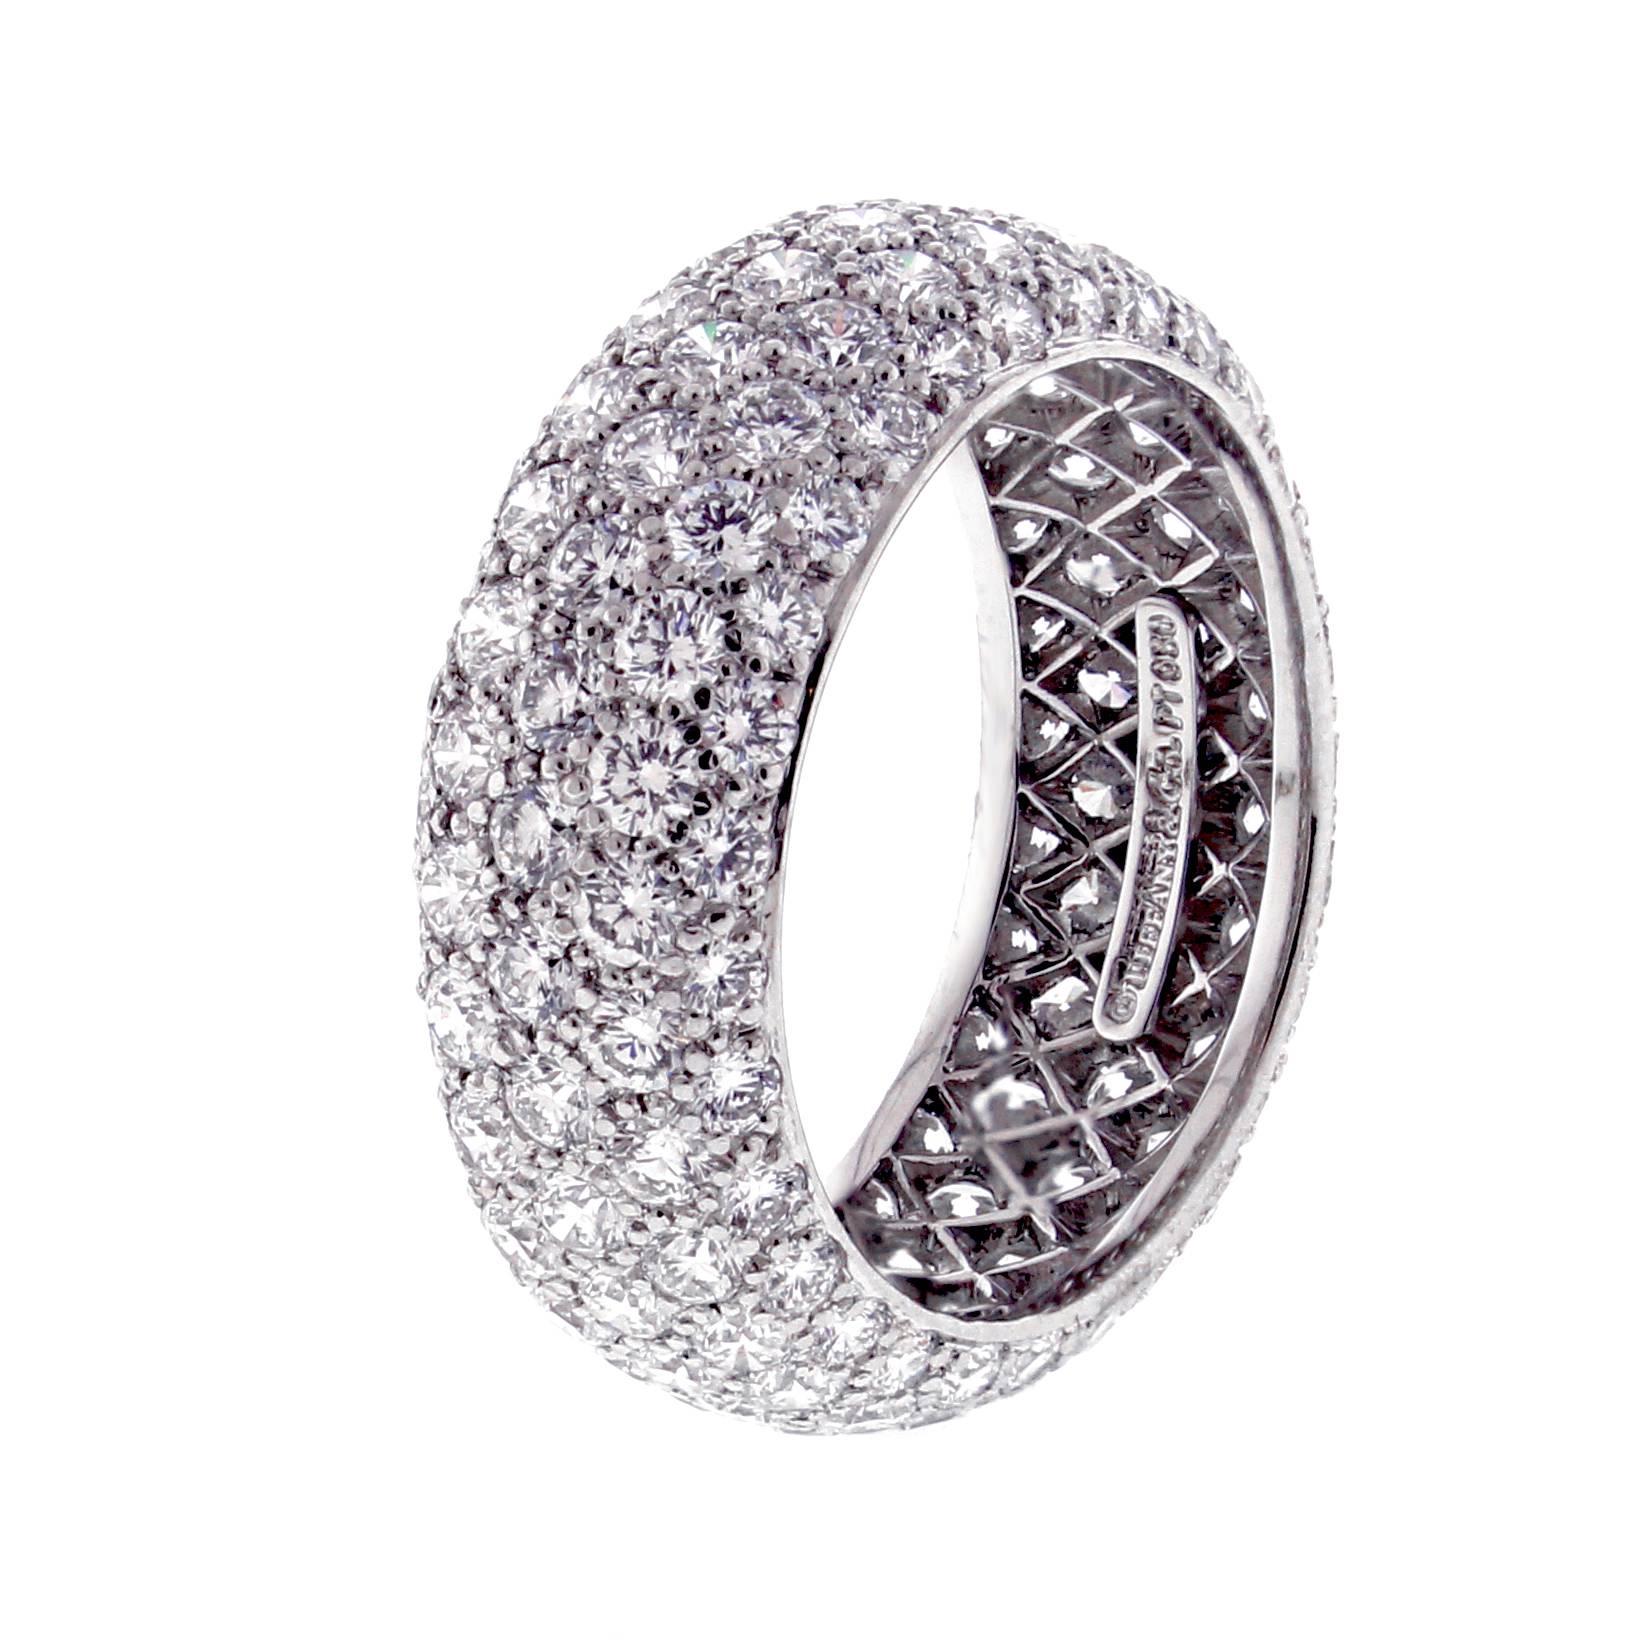 From Tiffany and Co.'s Etoile collection, a five-row band ring with 3.3 carats of round brilliant pavé-set 
Tiffany diamonds in platinum.  7½mm wide,  size 7